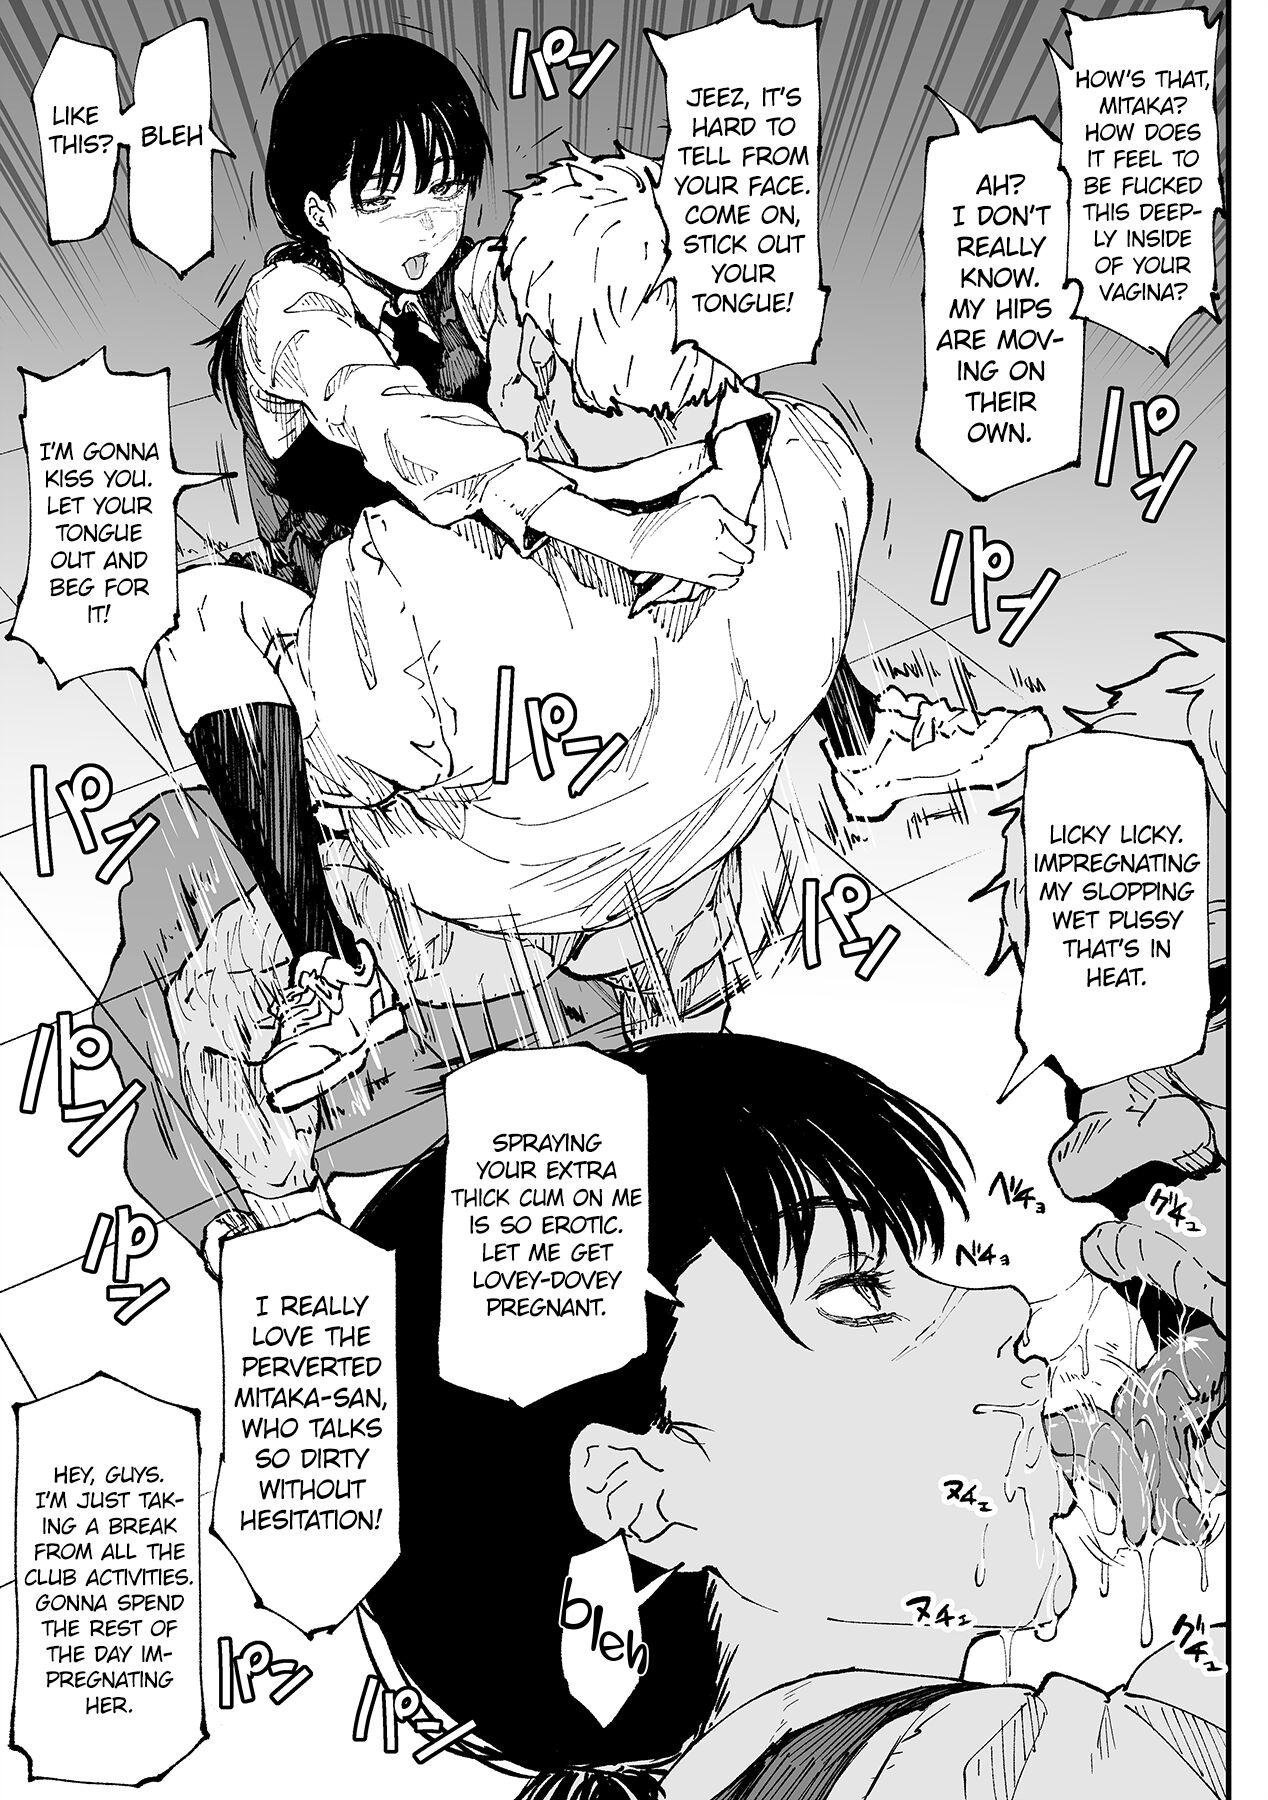 Punished Mitaka-san Does Her Best to Make you Hers - Chainsaw man Denmark - Page 4